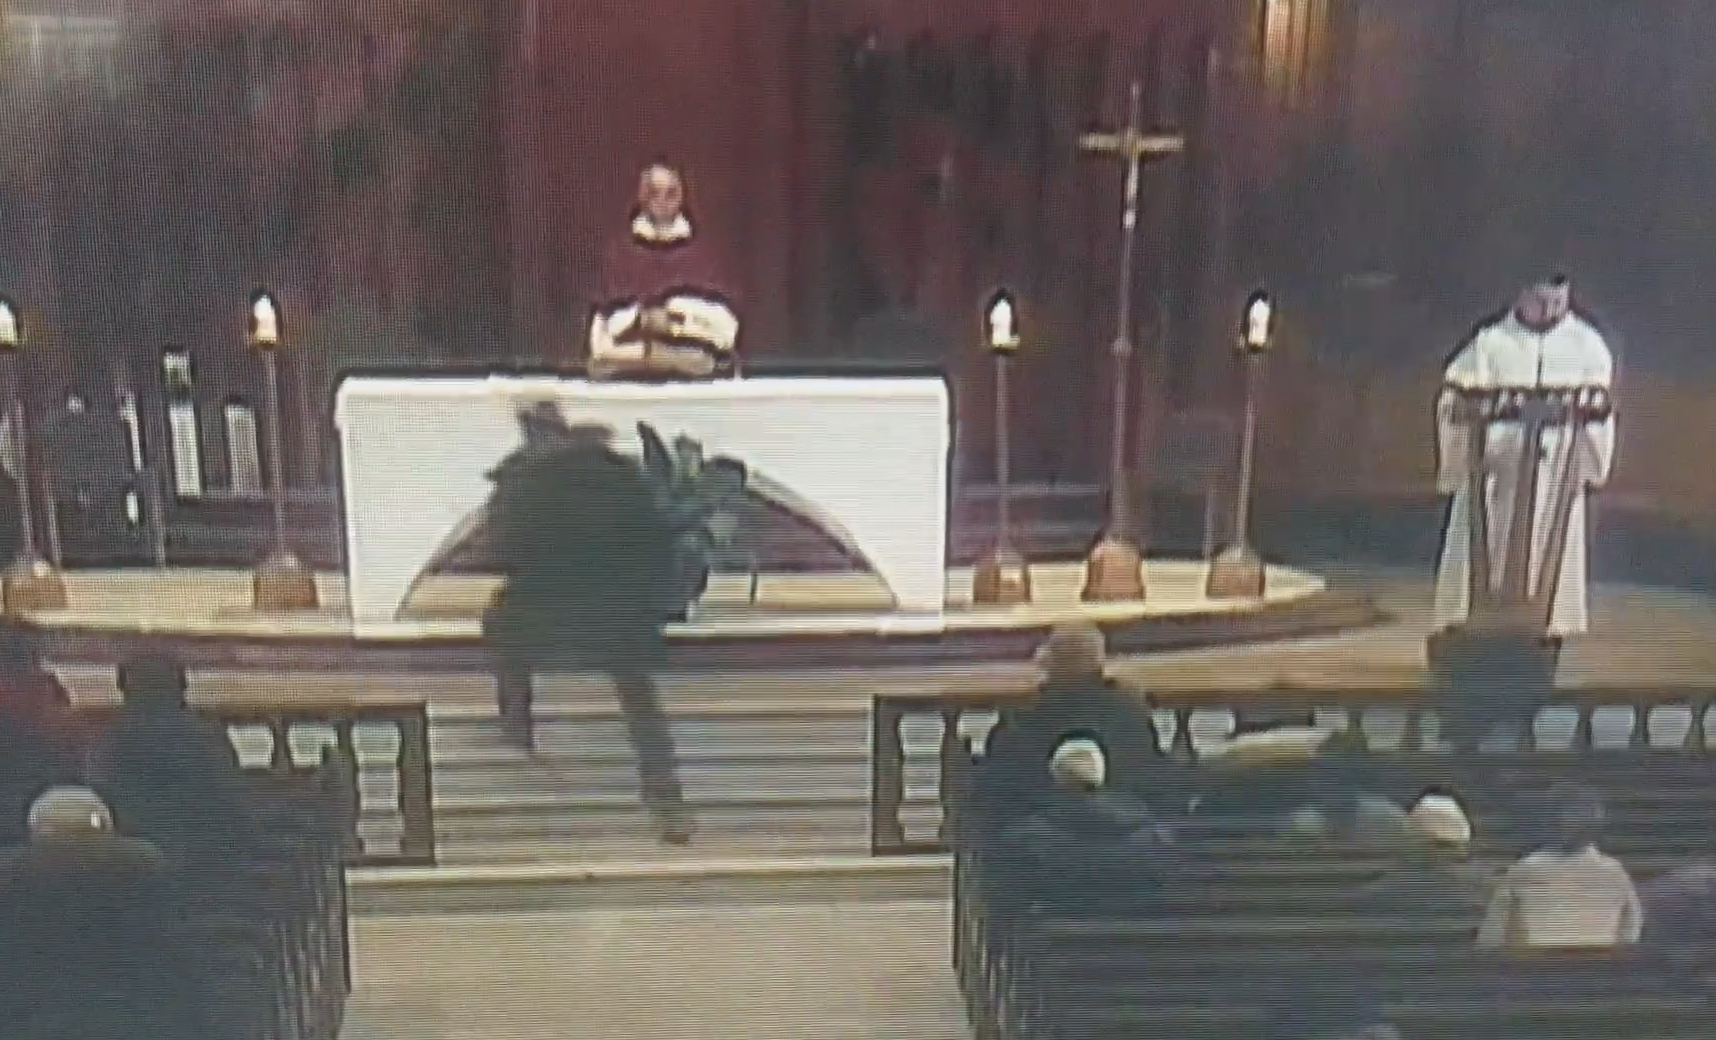 PHOTO: A Catholic priest was stabbed while celebrating Mass in Montreal, March 22, 2019, as stunned parishioners looked on, according to officials and video footage. The attack was broadcast on a live video stream.